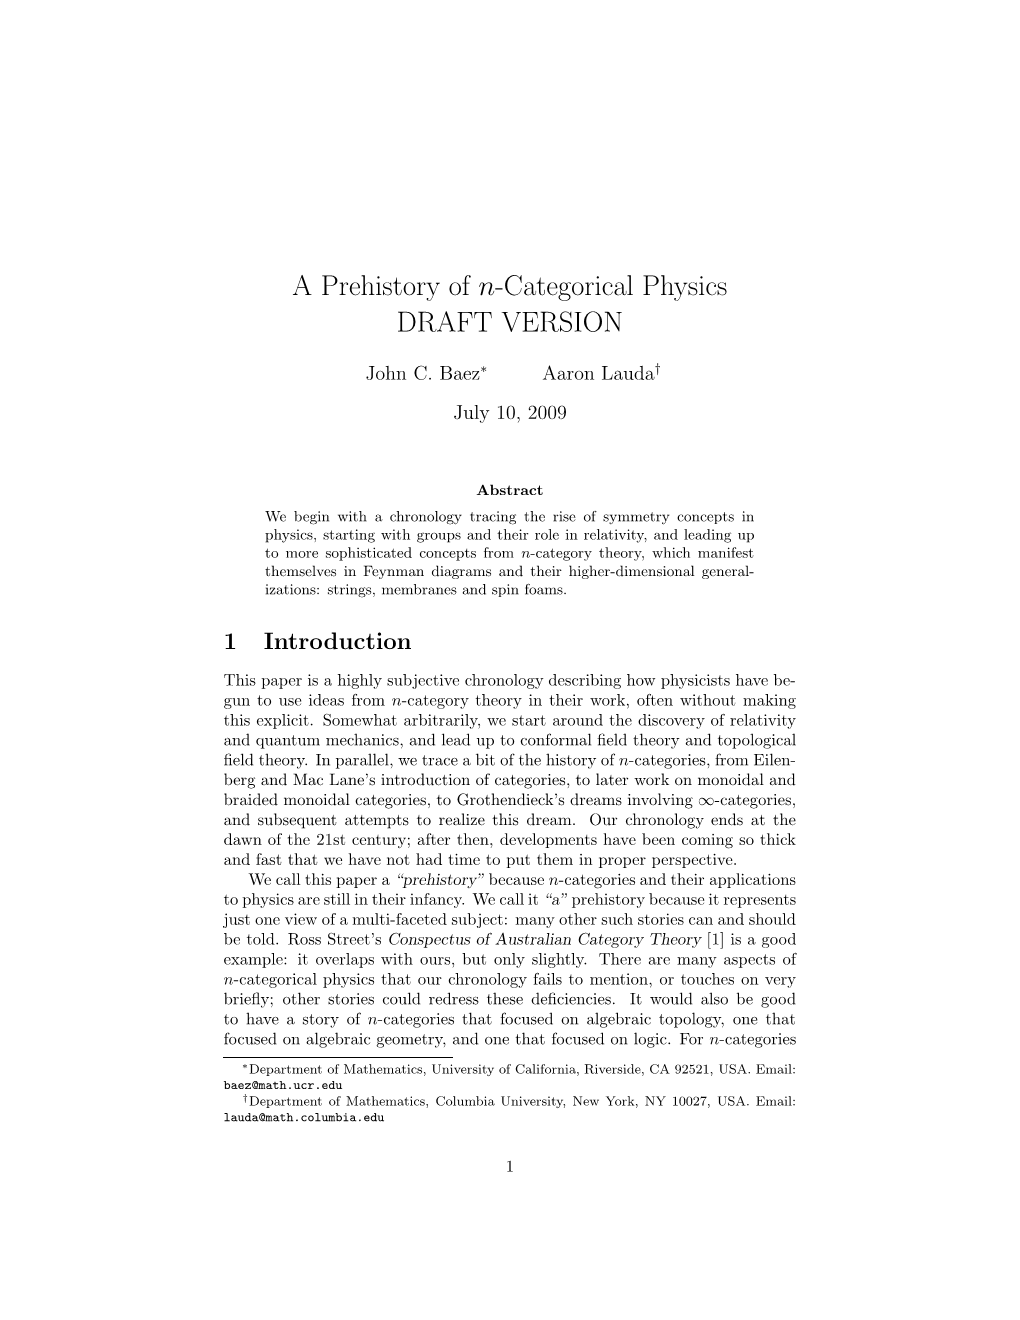 A Prehistory of N-Categorical Physics DRAFT VERSION